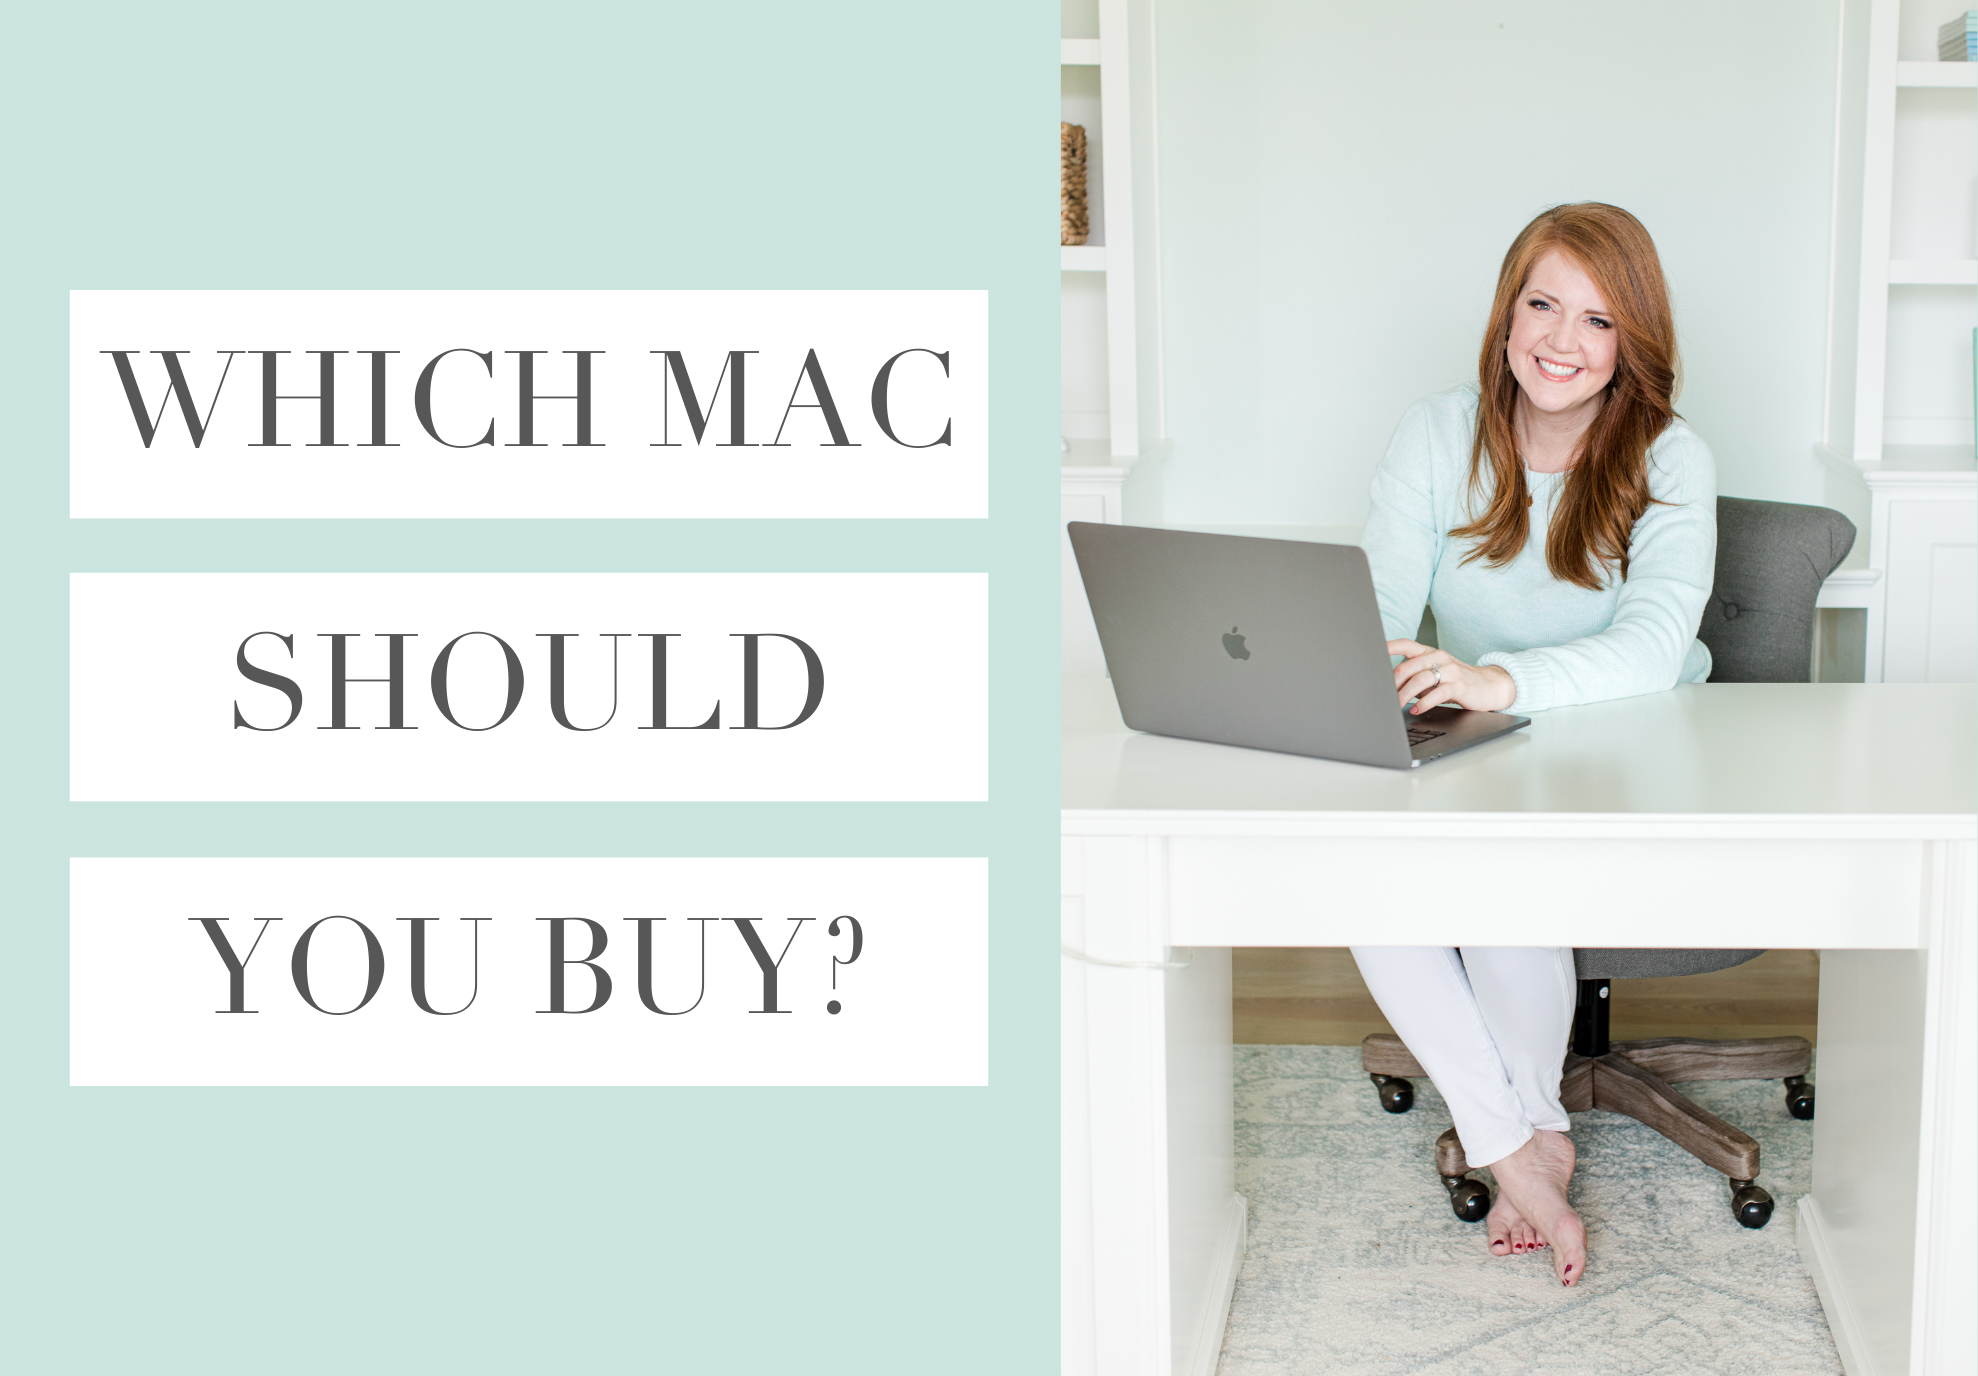 Which Mac Should You Buy?